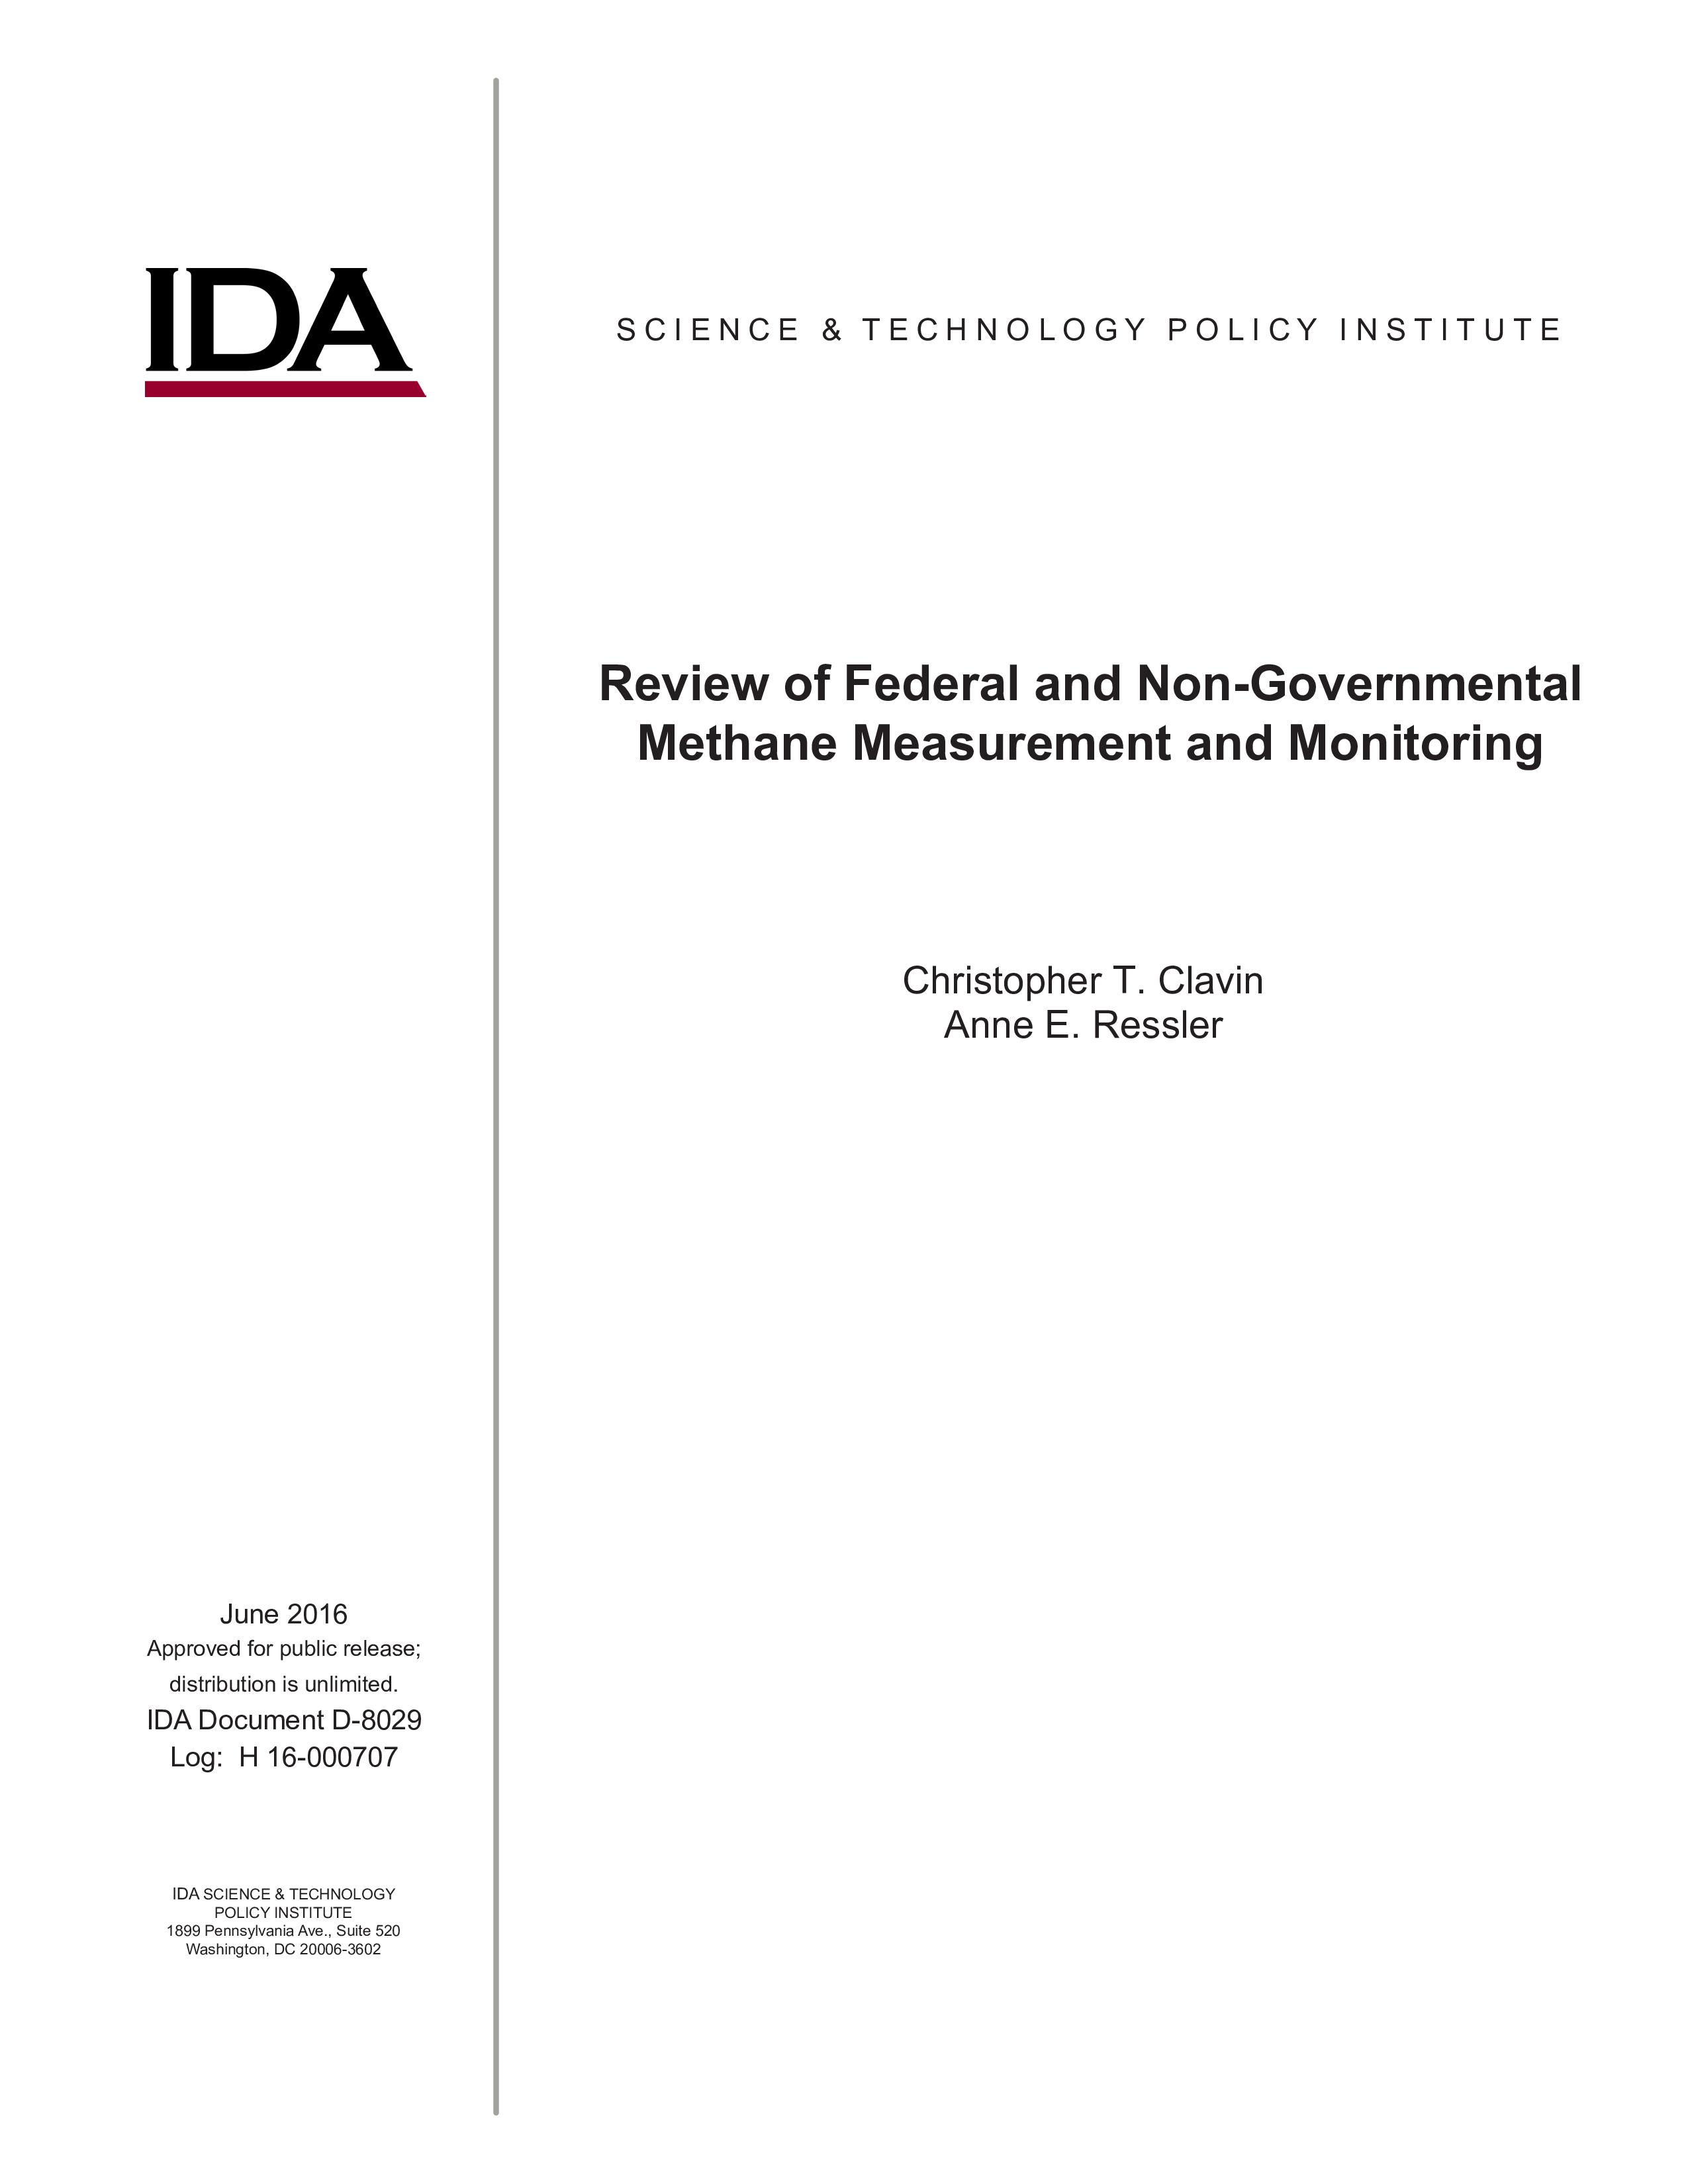 Review of Federal and Non-Governmental Methane Measurement and Monitoring